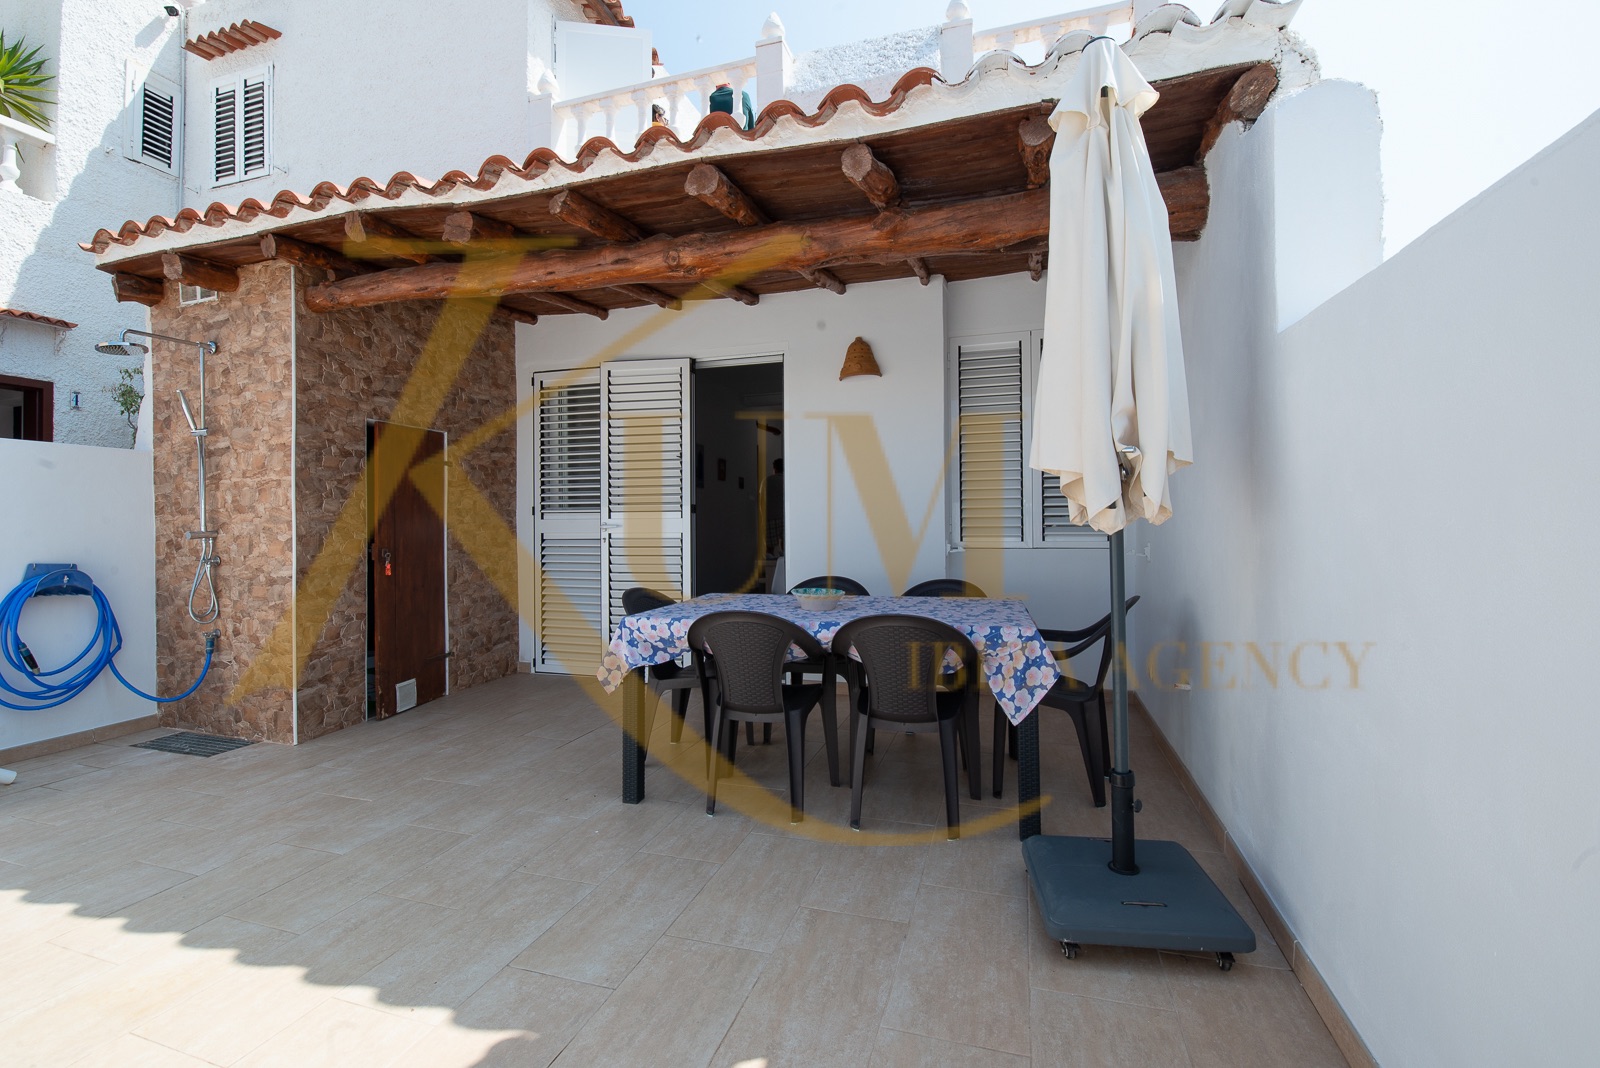 House for rent minutes from the beach Cala Tarida